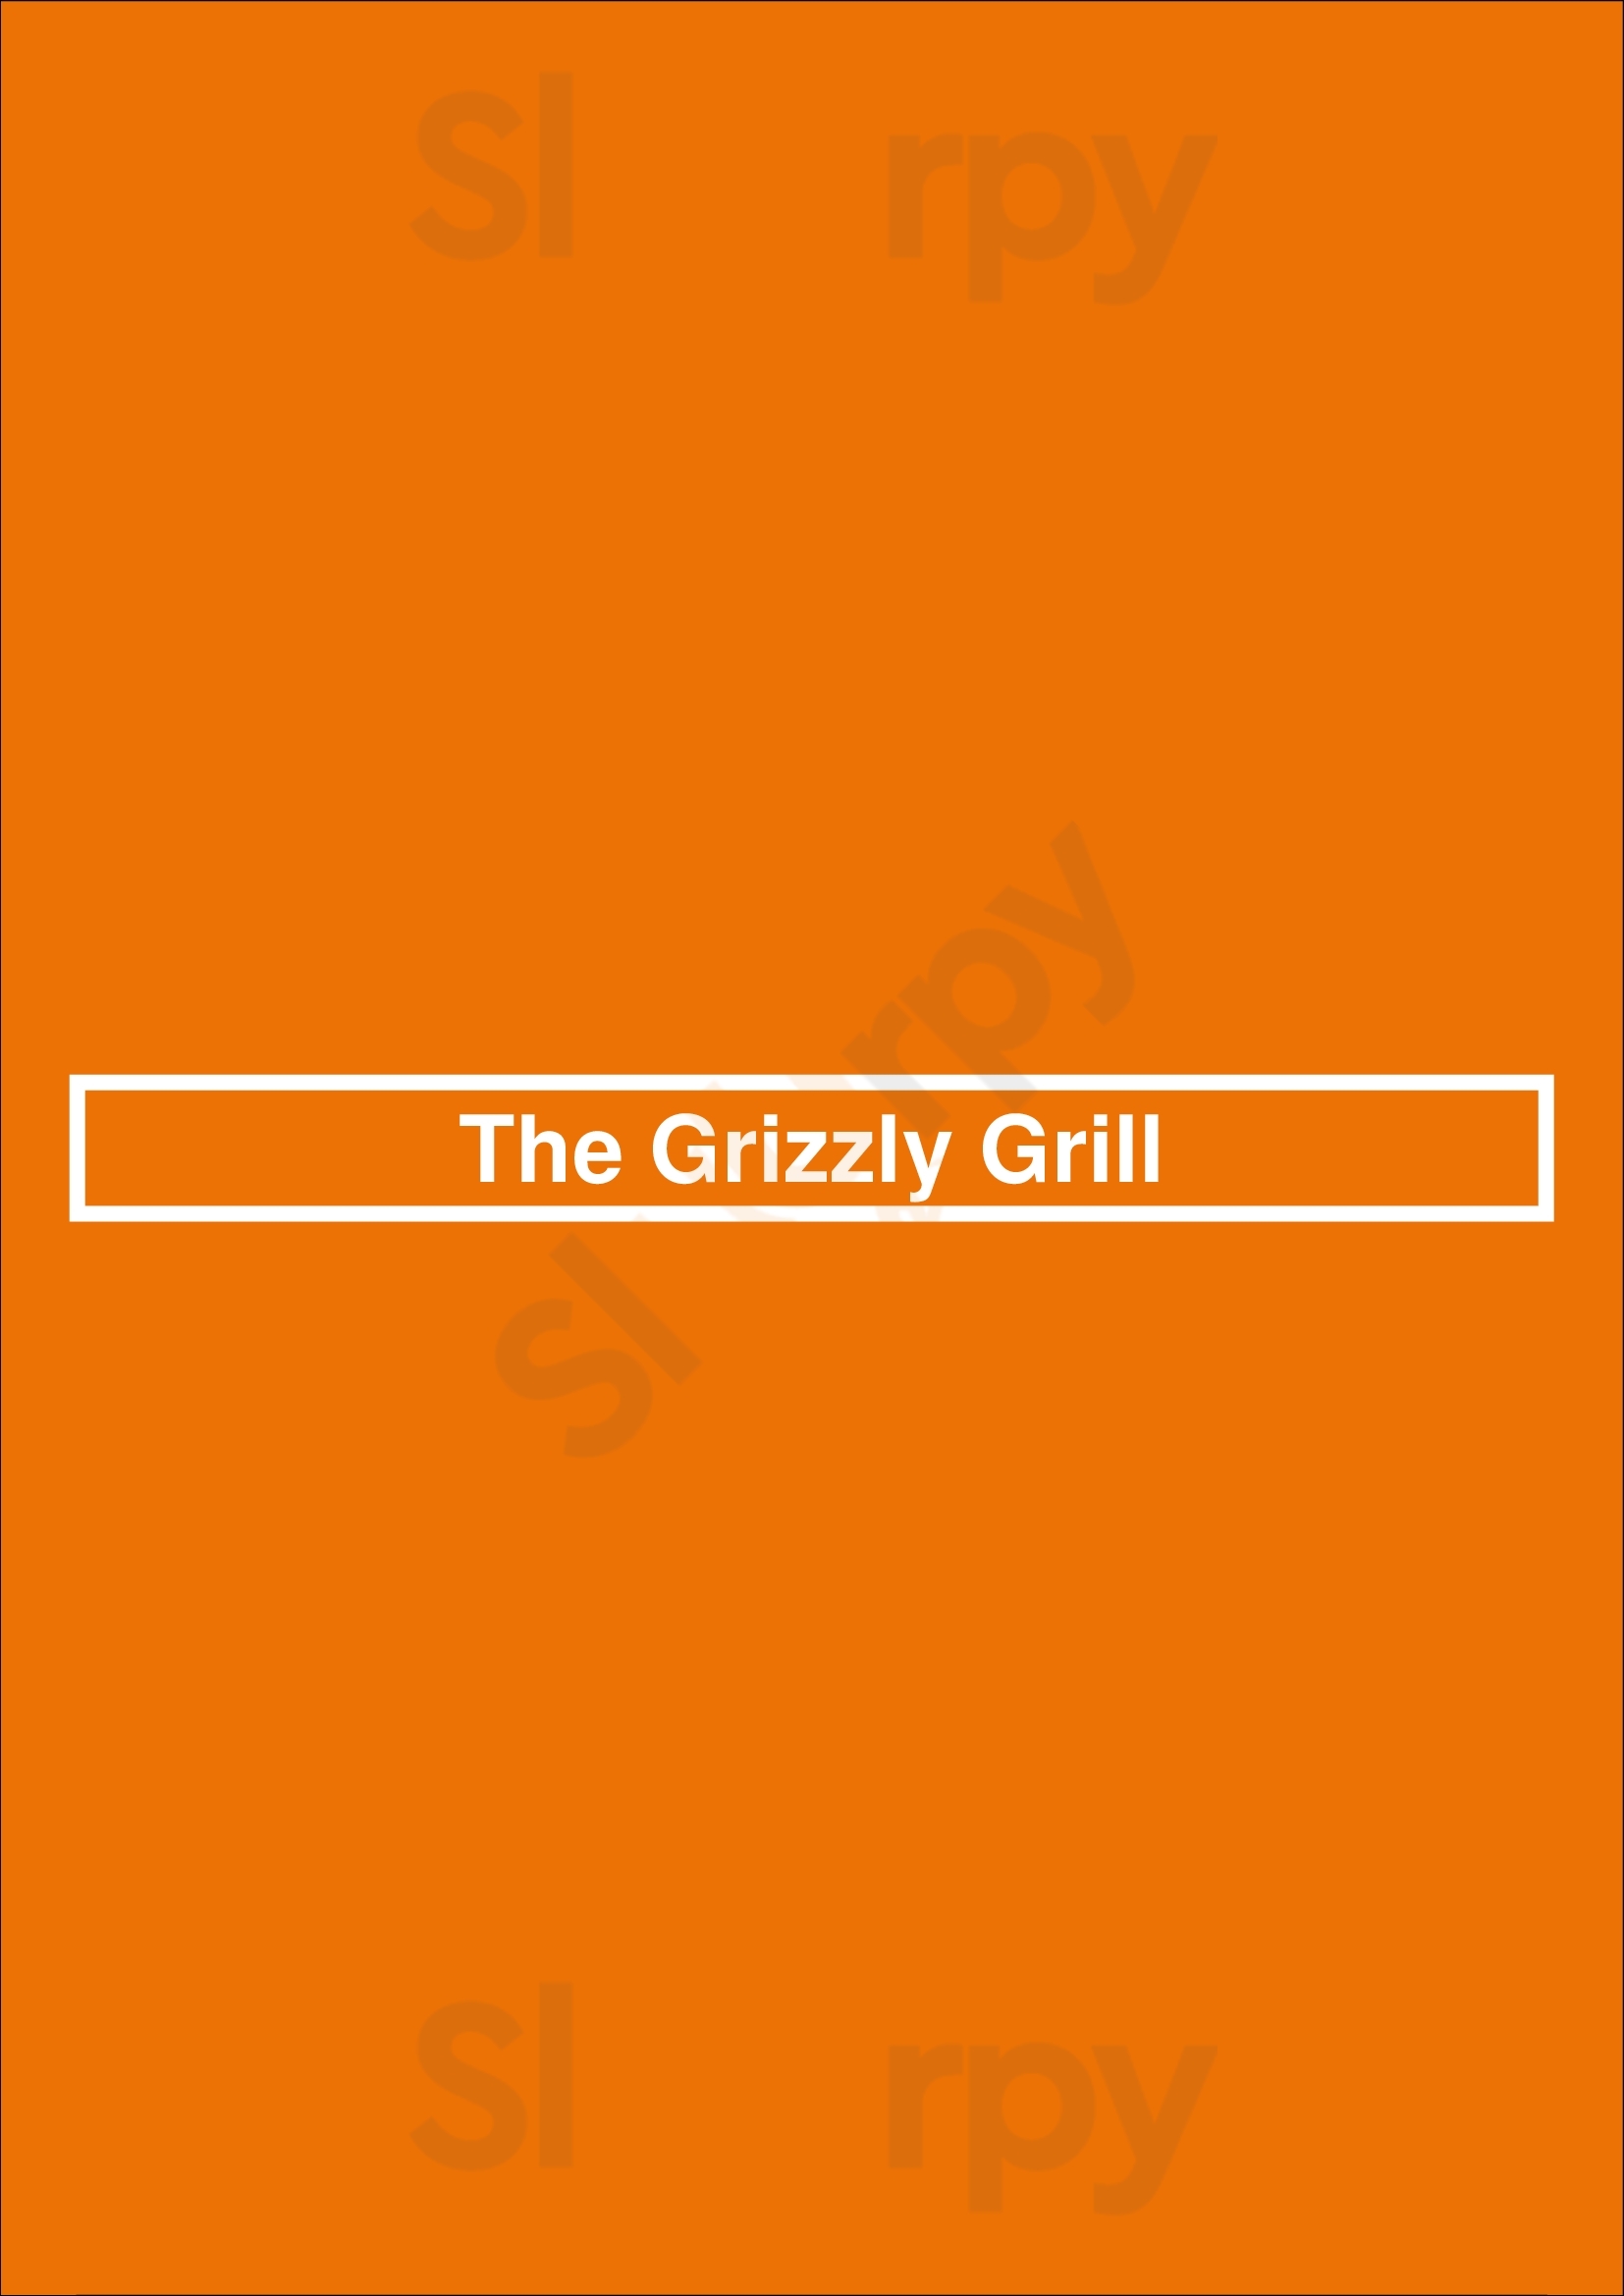 The Grizzly Grill Kingston Menu - 1